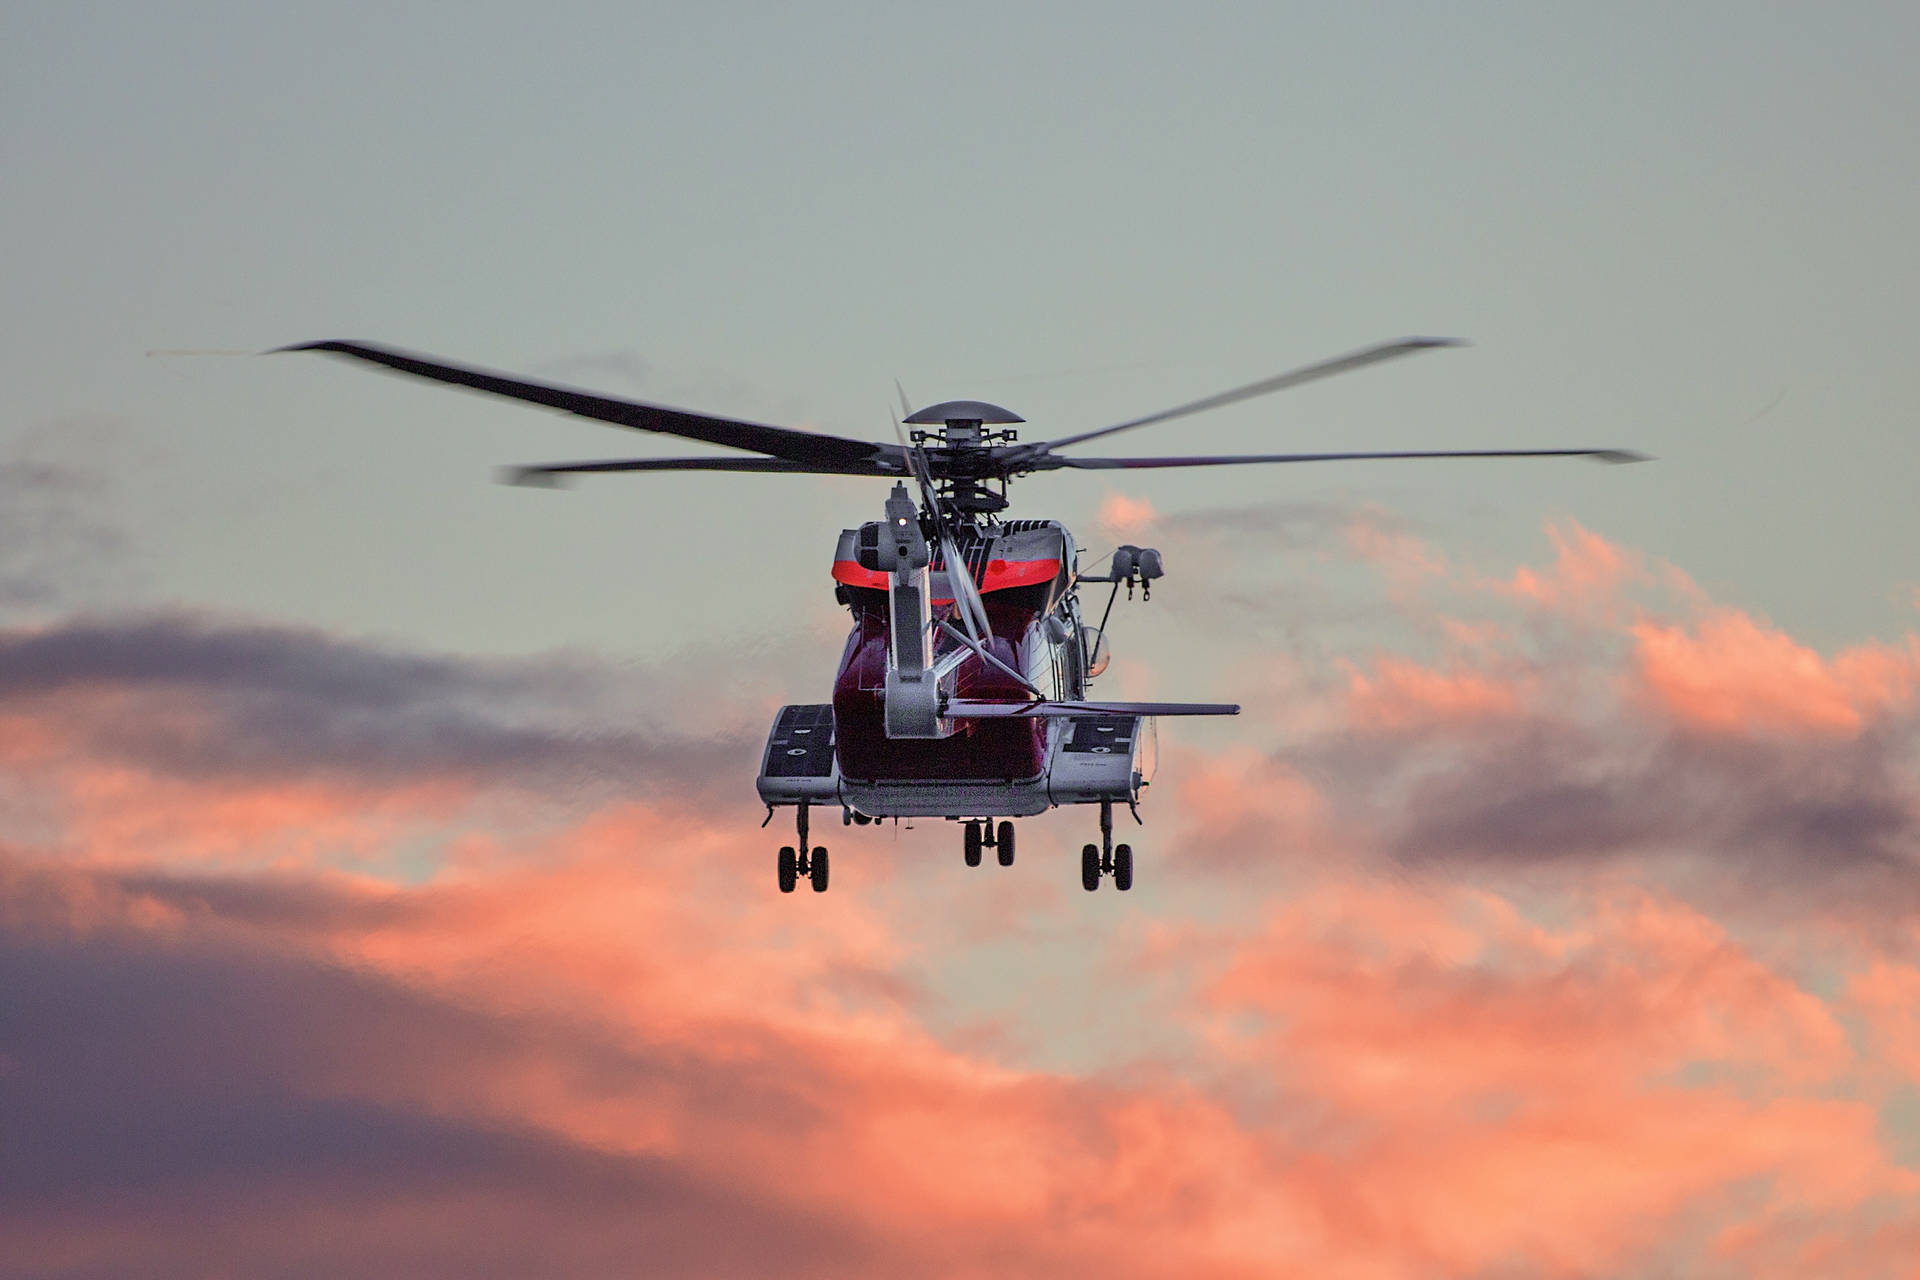 Sunset Clouds And Helicopter 4k Wallpaper